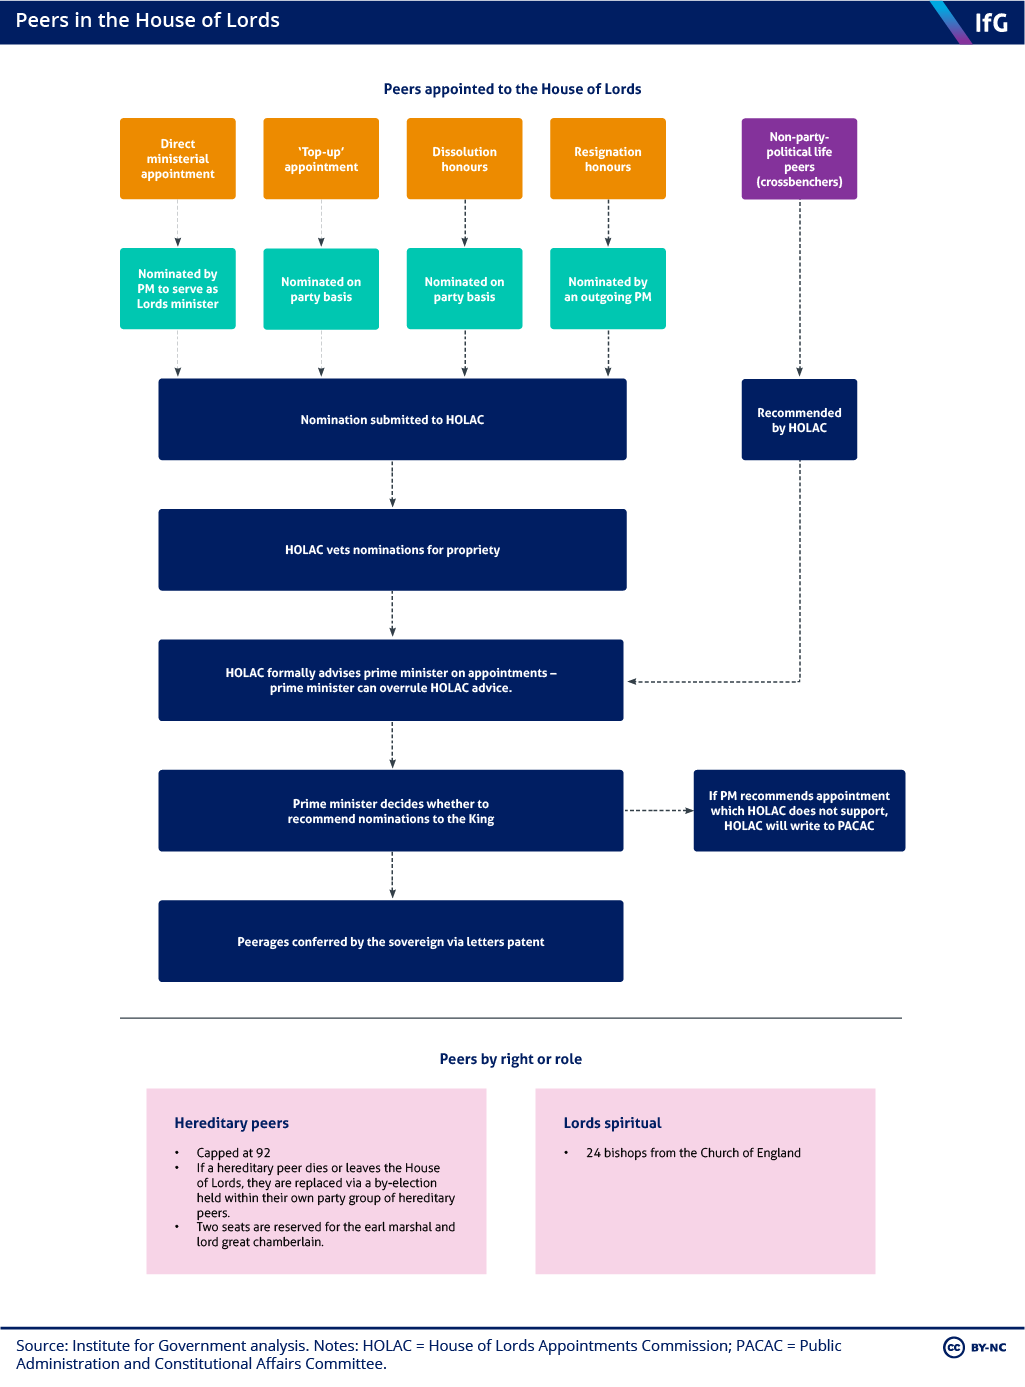 A graphic to show the process for appointing peers to the House of Lords. There are four ways: direct ministerial appointment; top-up appointments; dissolution honours and resignation honours.